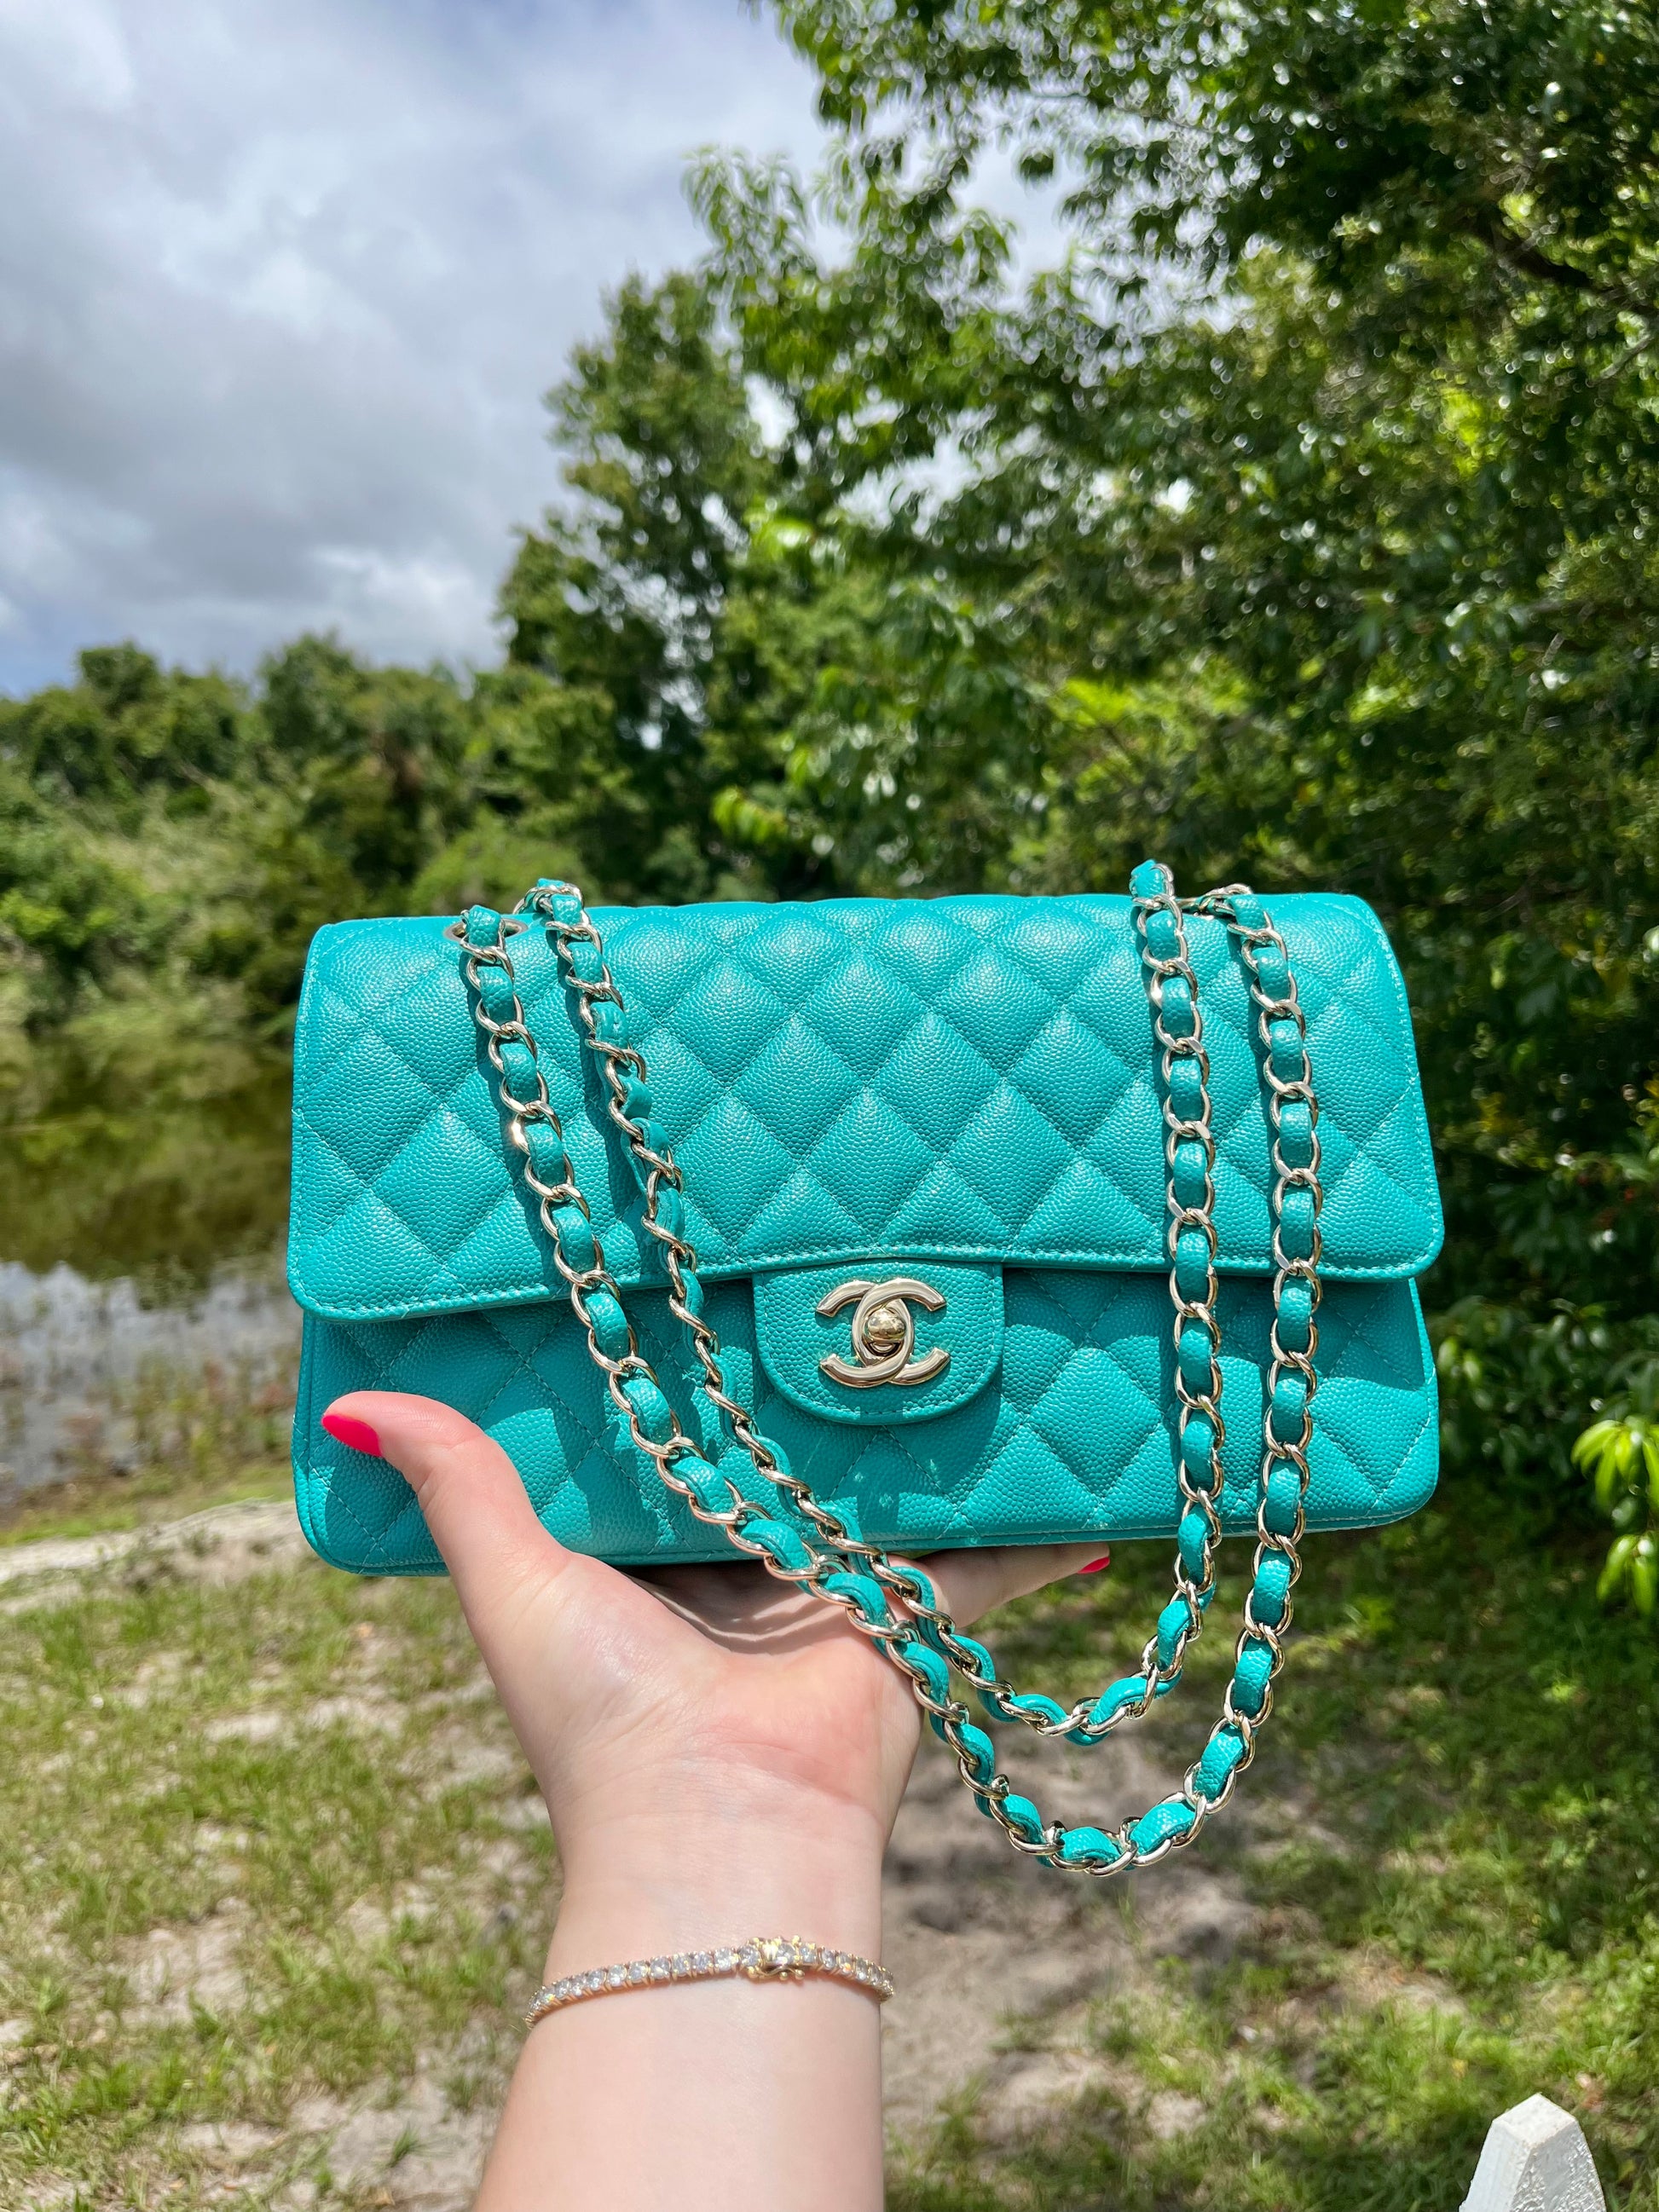 2017 Chanel Turquoise Quilted Caviar Leather Medium Classic Double Flap Bag